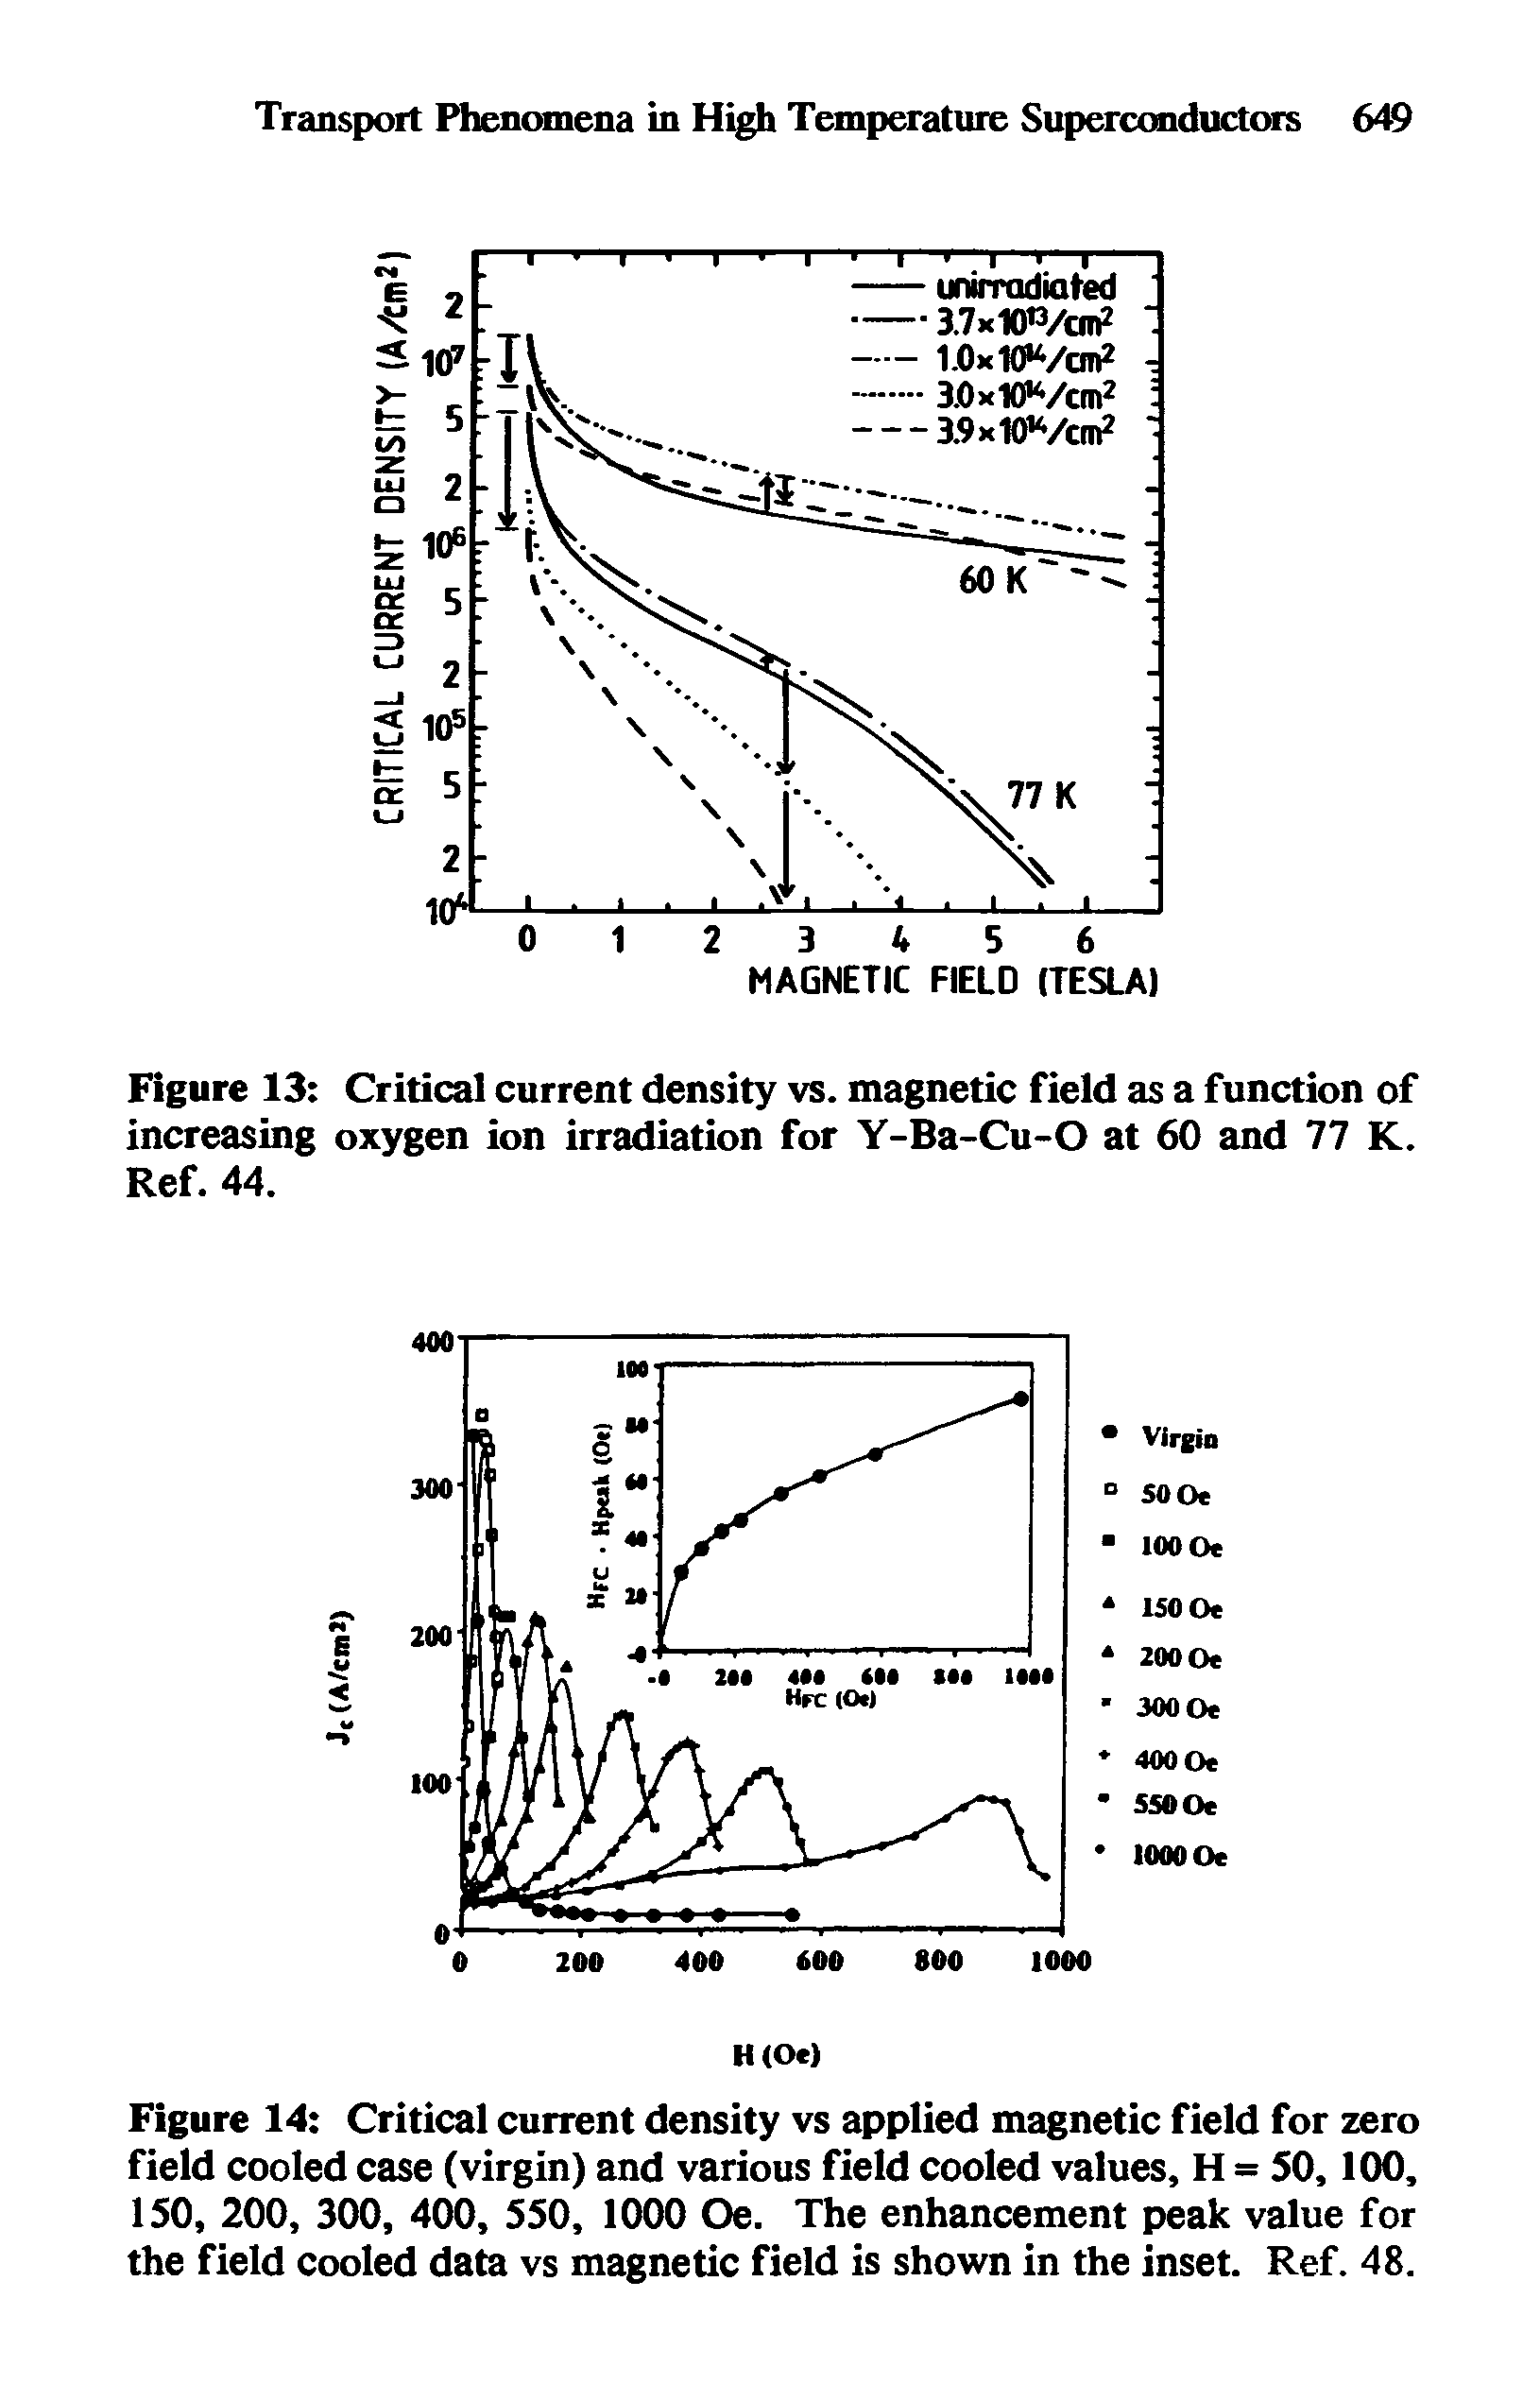 Figure 14 Critical current density vs applied magnetic field for zero field cooled case (virgin) and various field cooled values, H = SO, 100, 150, 200, 300, 400, 550, 1000 Oe. The enhancement peak value for the field cooled data vs magnetic field is shown in the inset. Ref. 48.